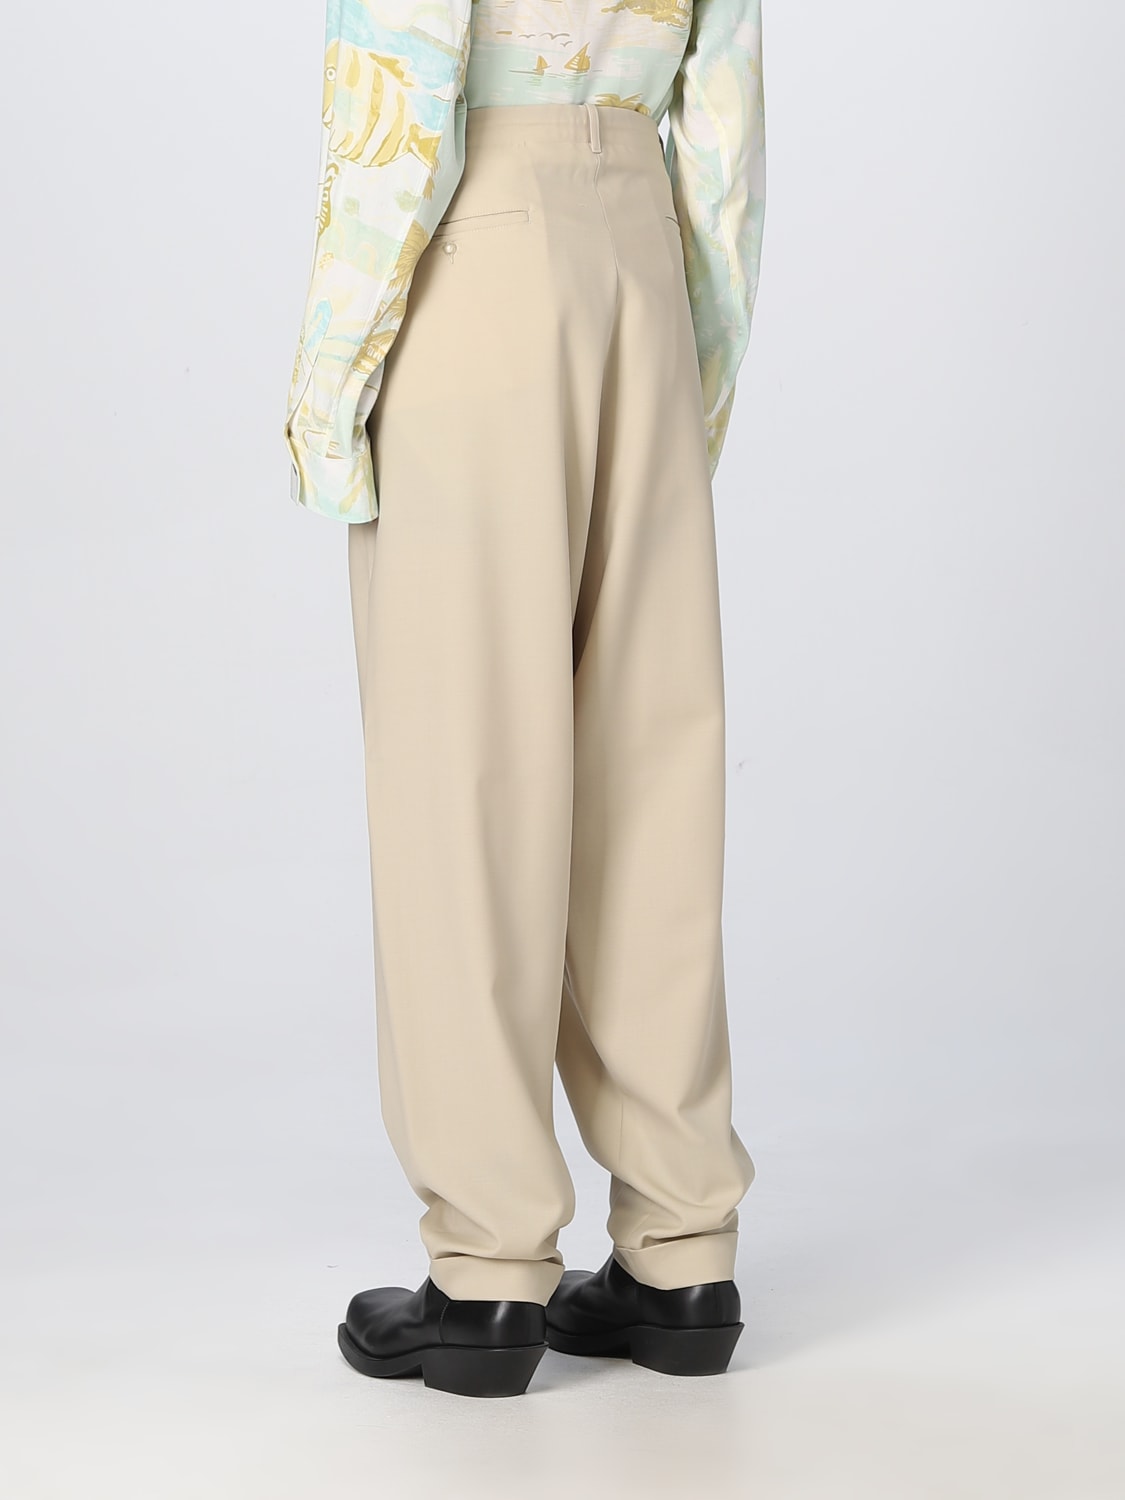 Magliano Outlet: trousers for men - Beige | Magliano trousers